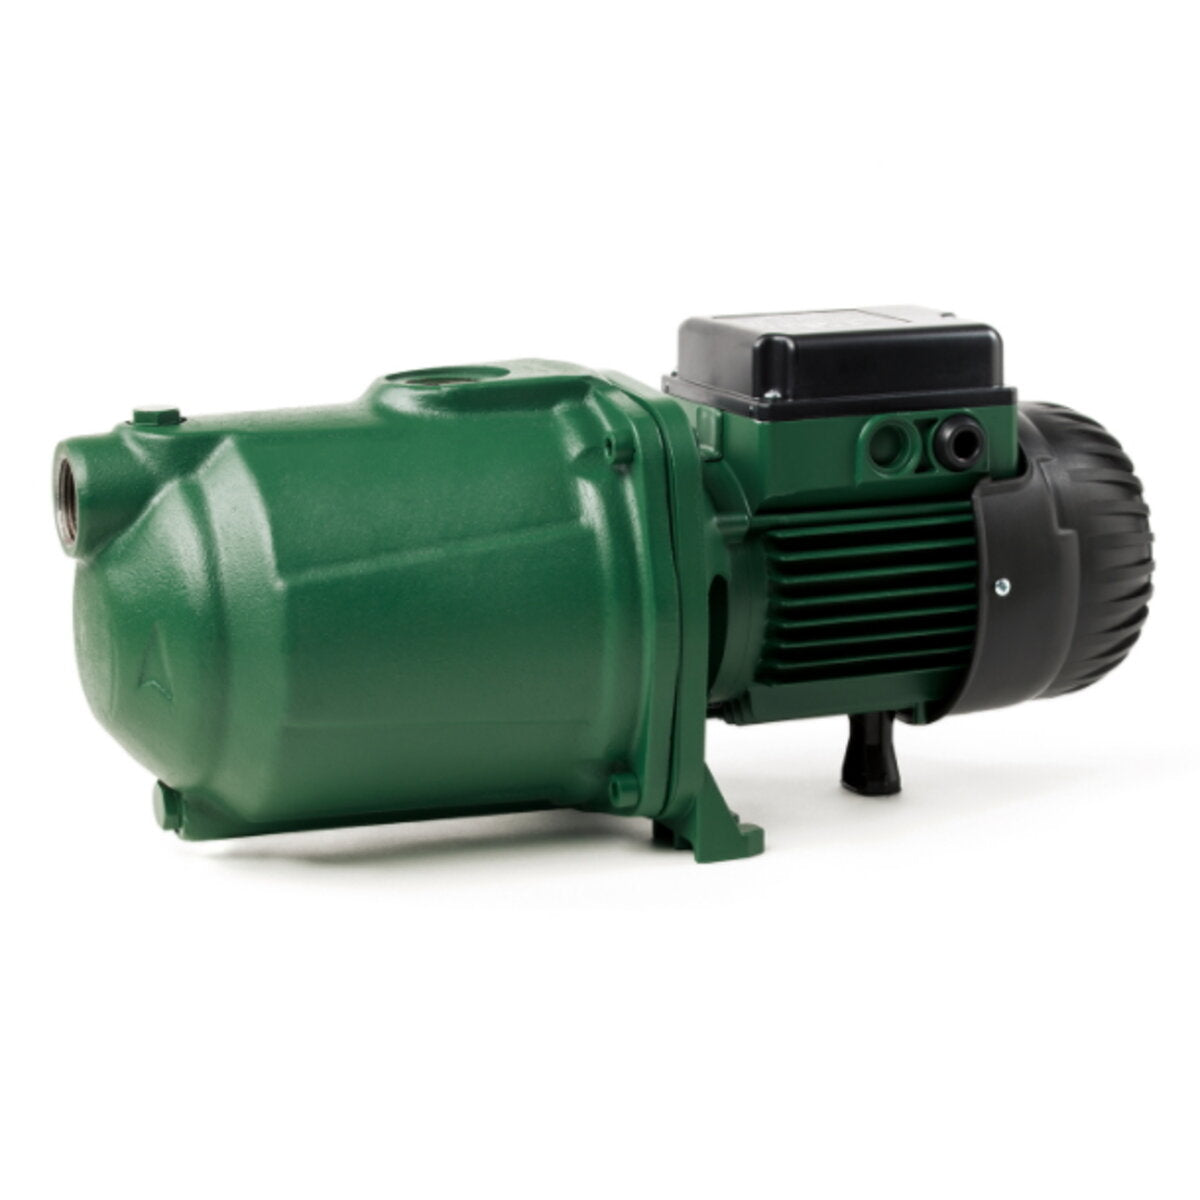 Single-phase EURO 40/50 M multistage centrifugal DAB surface pump 1 HP / 0.75 kW